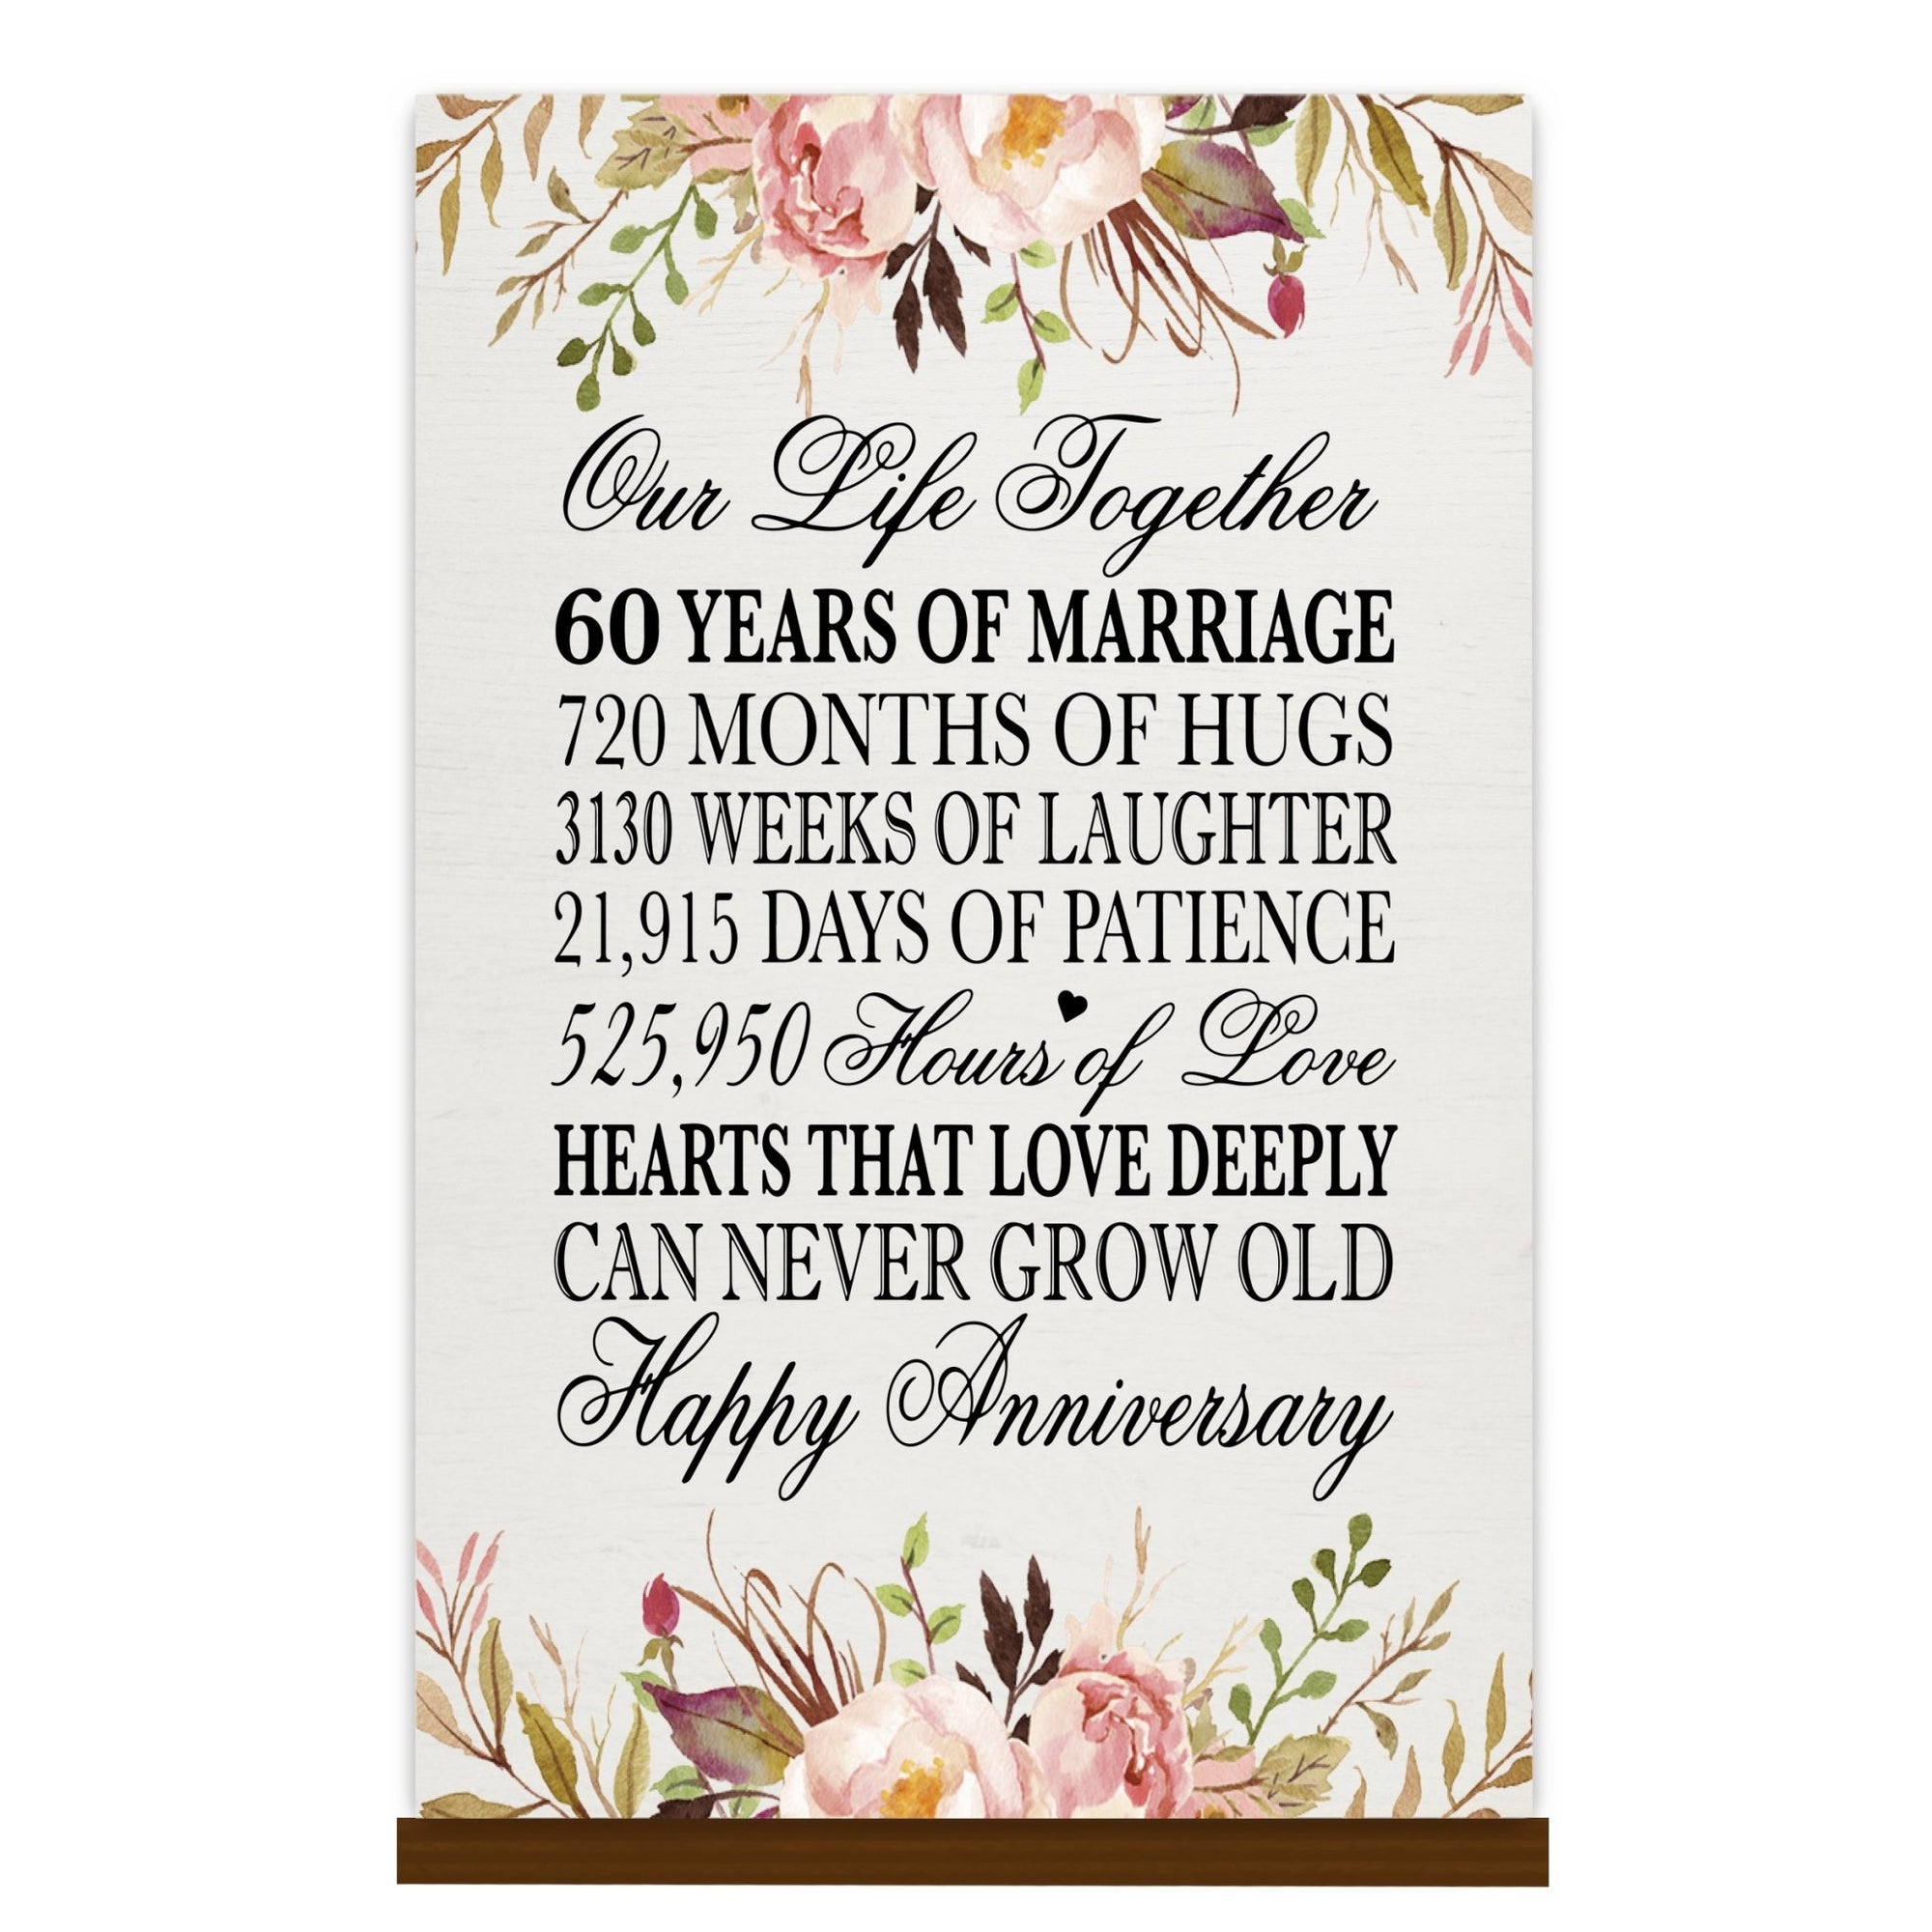 LifeSong Milestones 60th Anniversary Wall Plaque for Couples